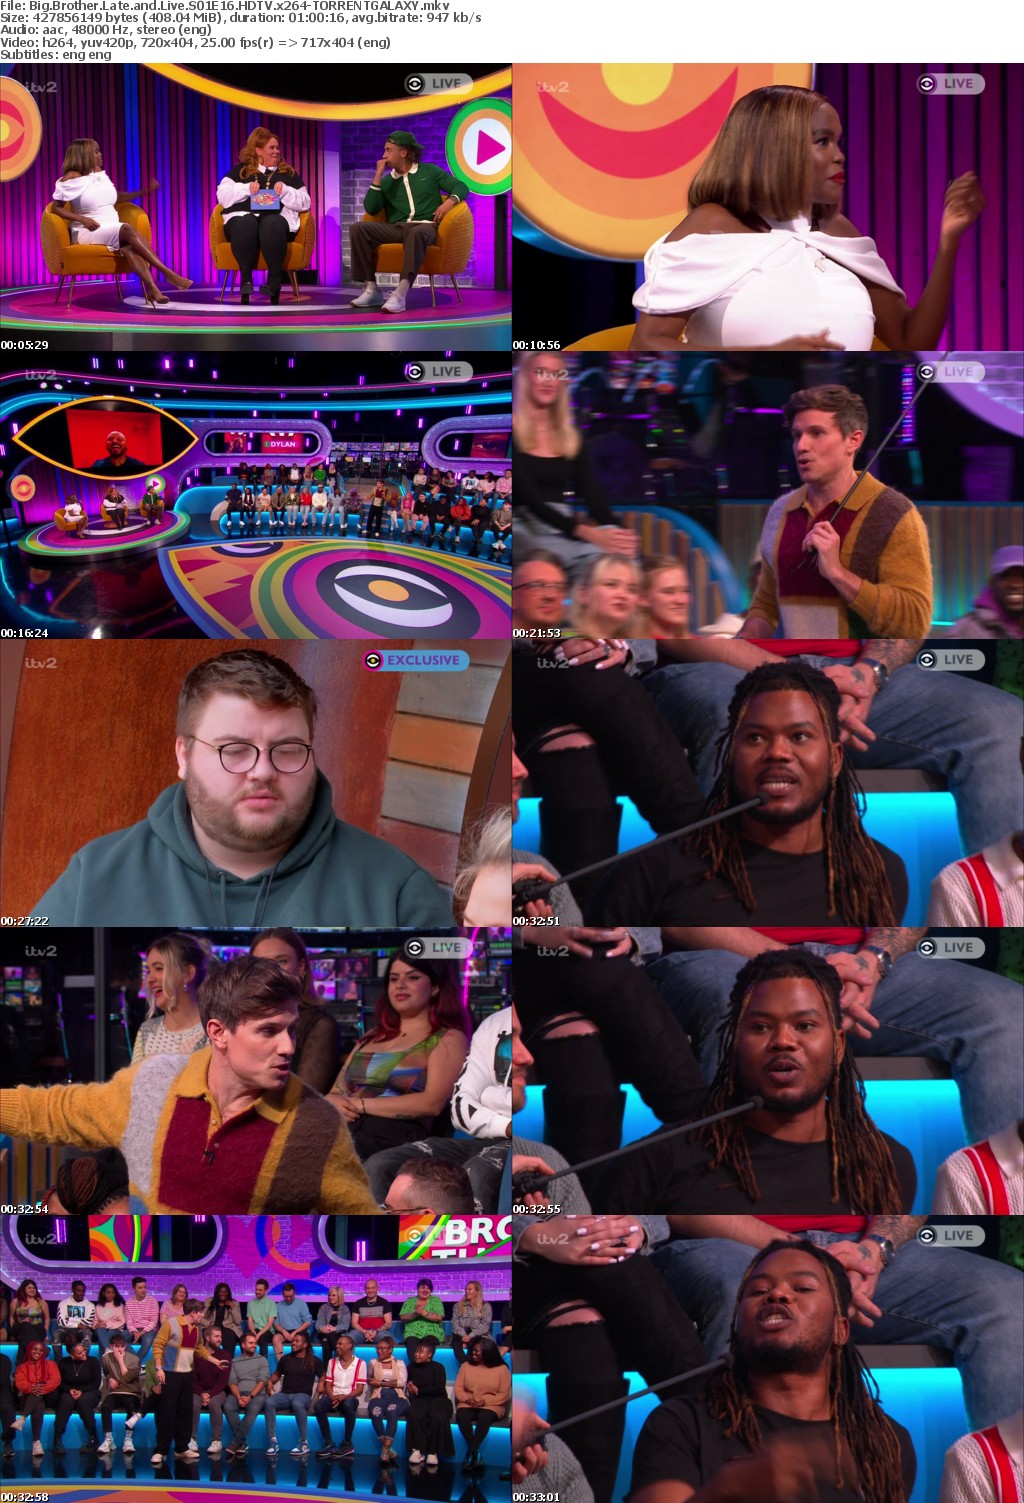 Big Brother Late and Live S01E16 HDTV x264-GALAXY